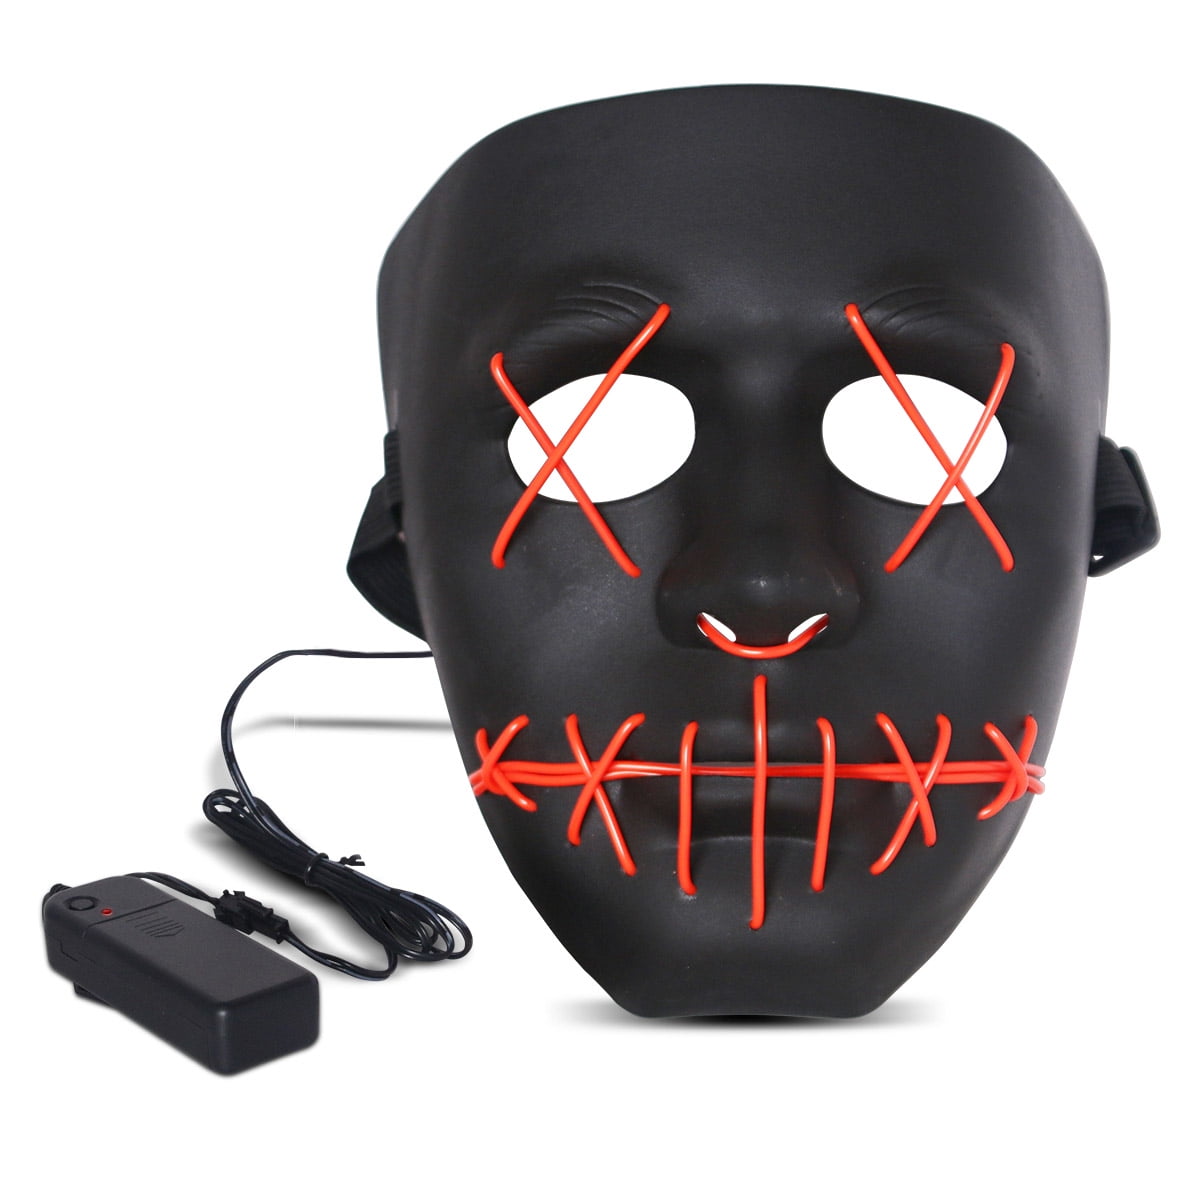 Halloween Light Up Mask EL Wire Scary Mask for Halloween Festival Party Pretend Masks 